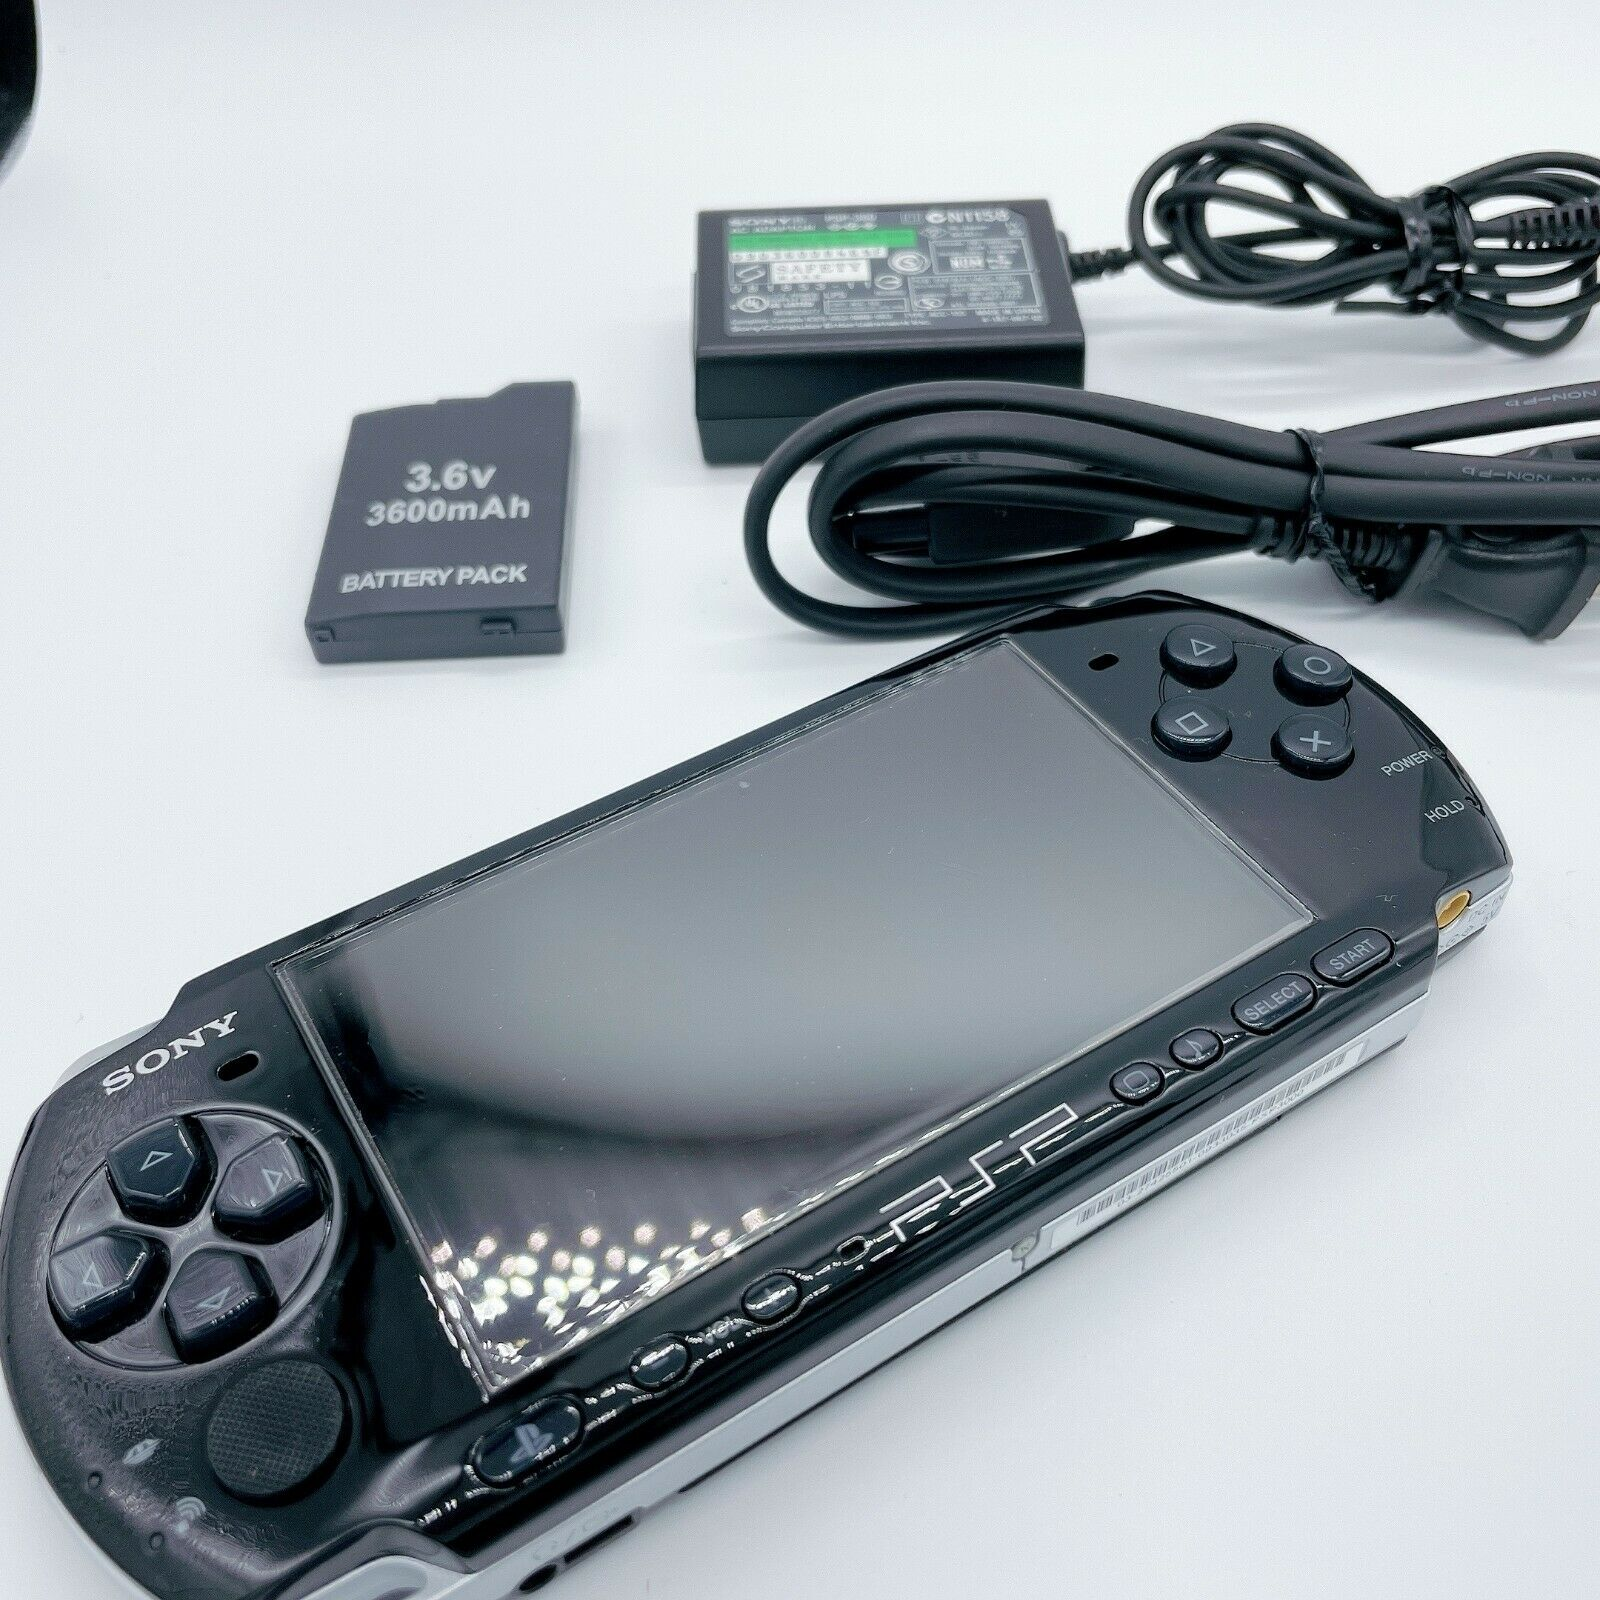 Sony PSP-3000 Launch Edition Piano Black Handheld System Console Excellent